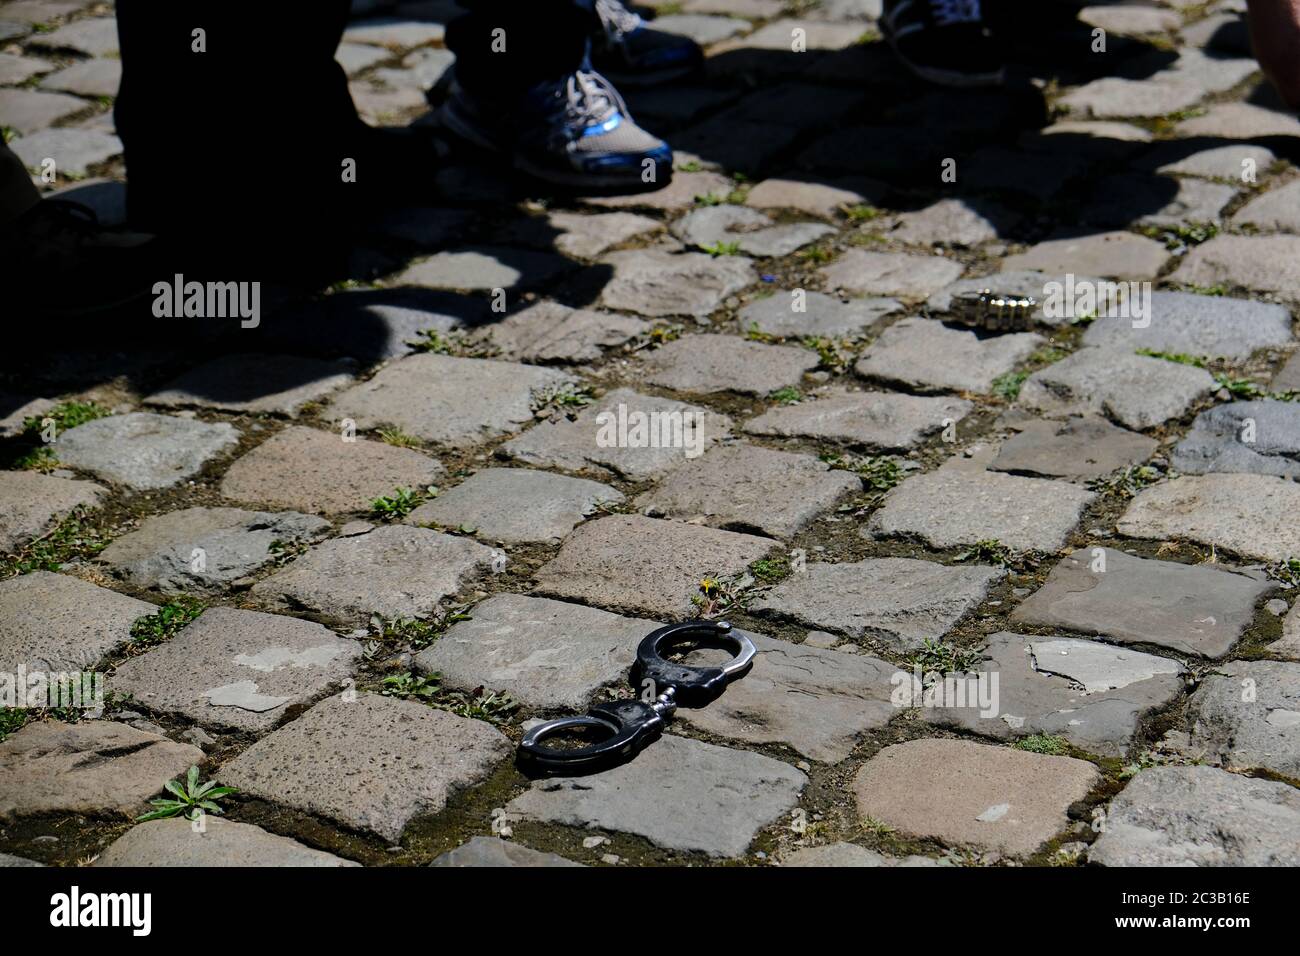 Brussels, Belgium. 19th June, 2020. Handcuffs left on the ground by police officers are pictured during a protest violence against the police and a perceived anti-police sentiment in the media. Credit: ALEXANDROS MICHAILIDIS/Alamy Live News Stock Photo